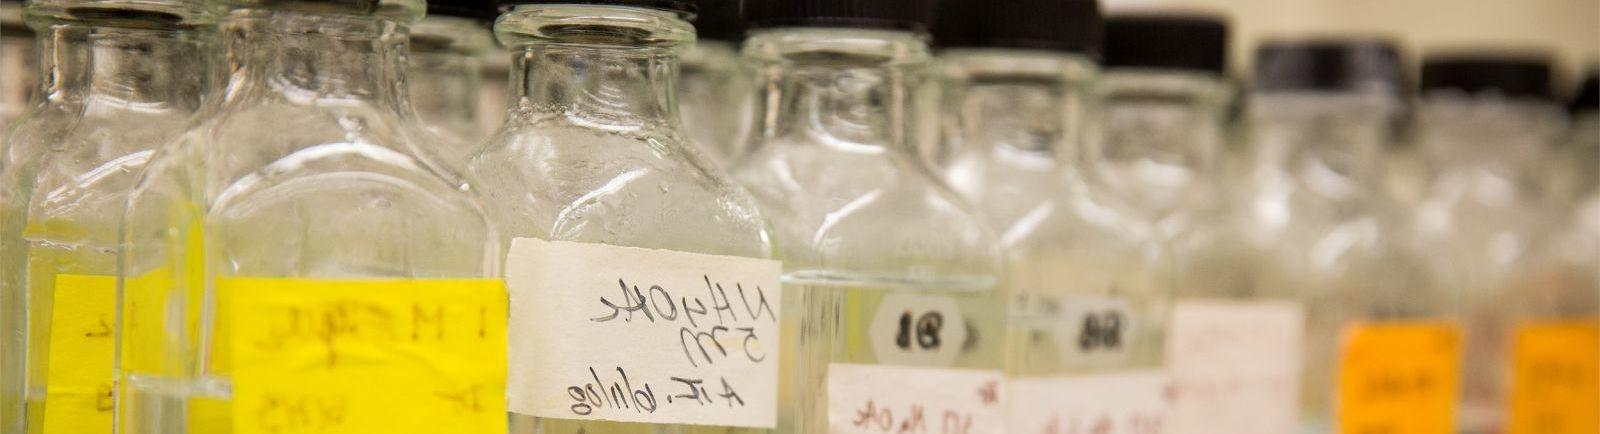 Glass containers with yellow labels lined up in a Biology lab